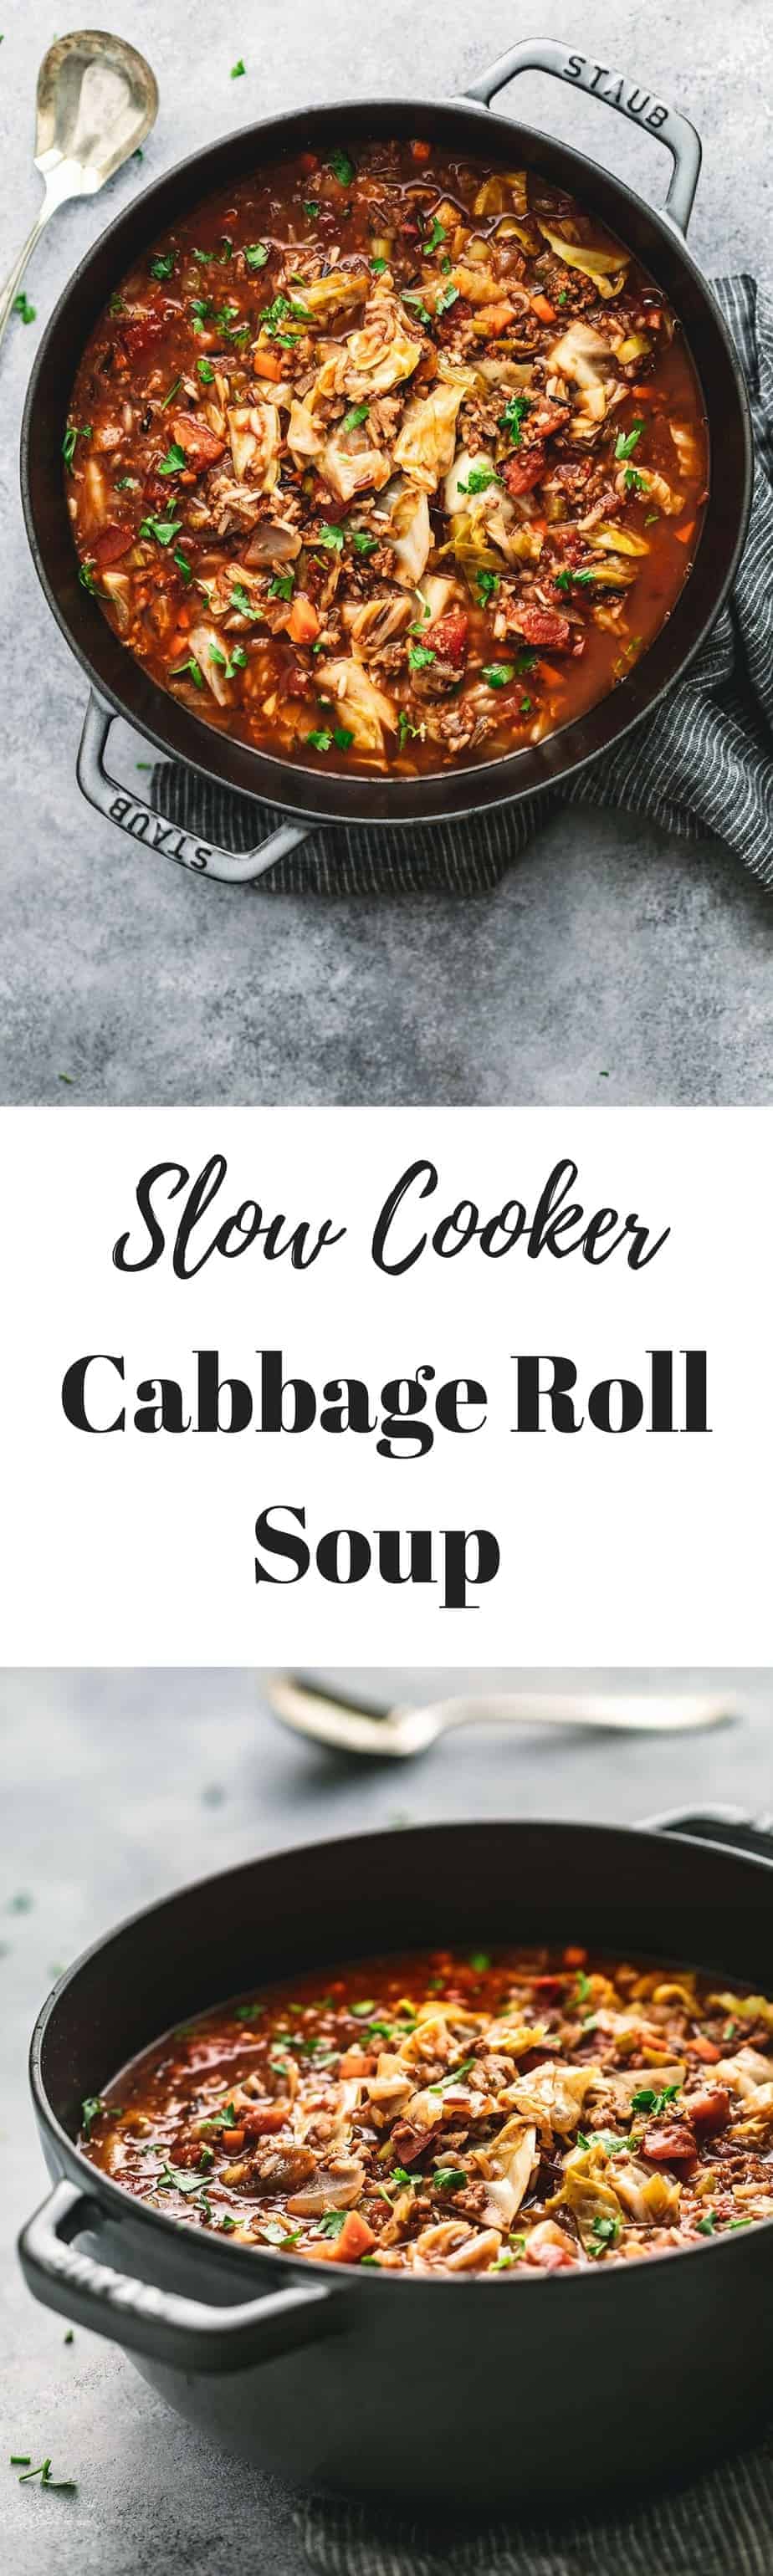 slow cooker cabbage roll soup